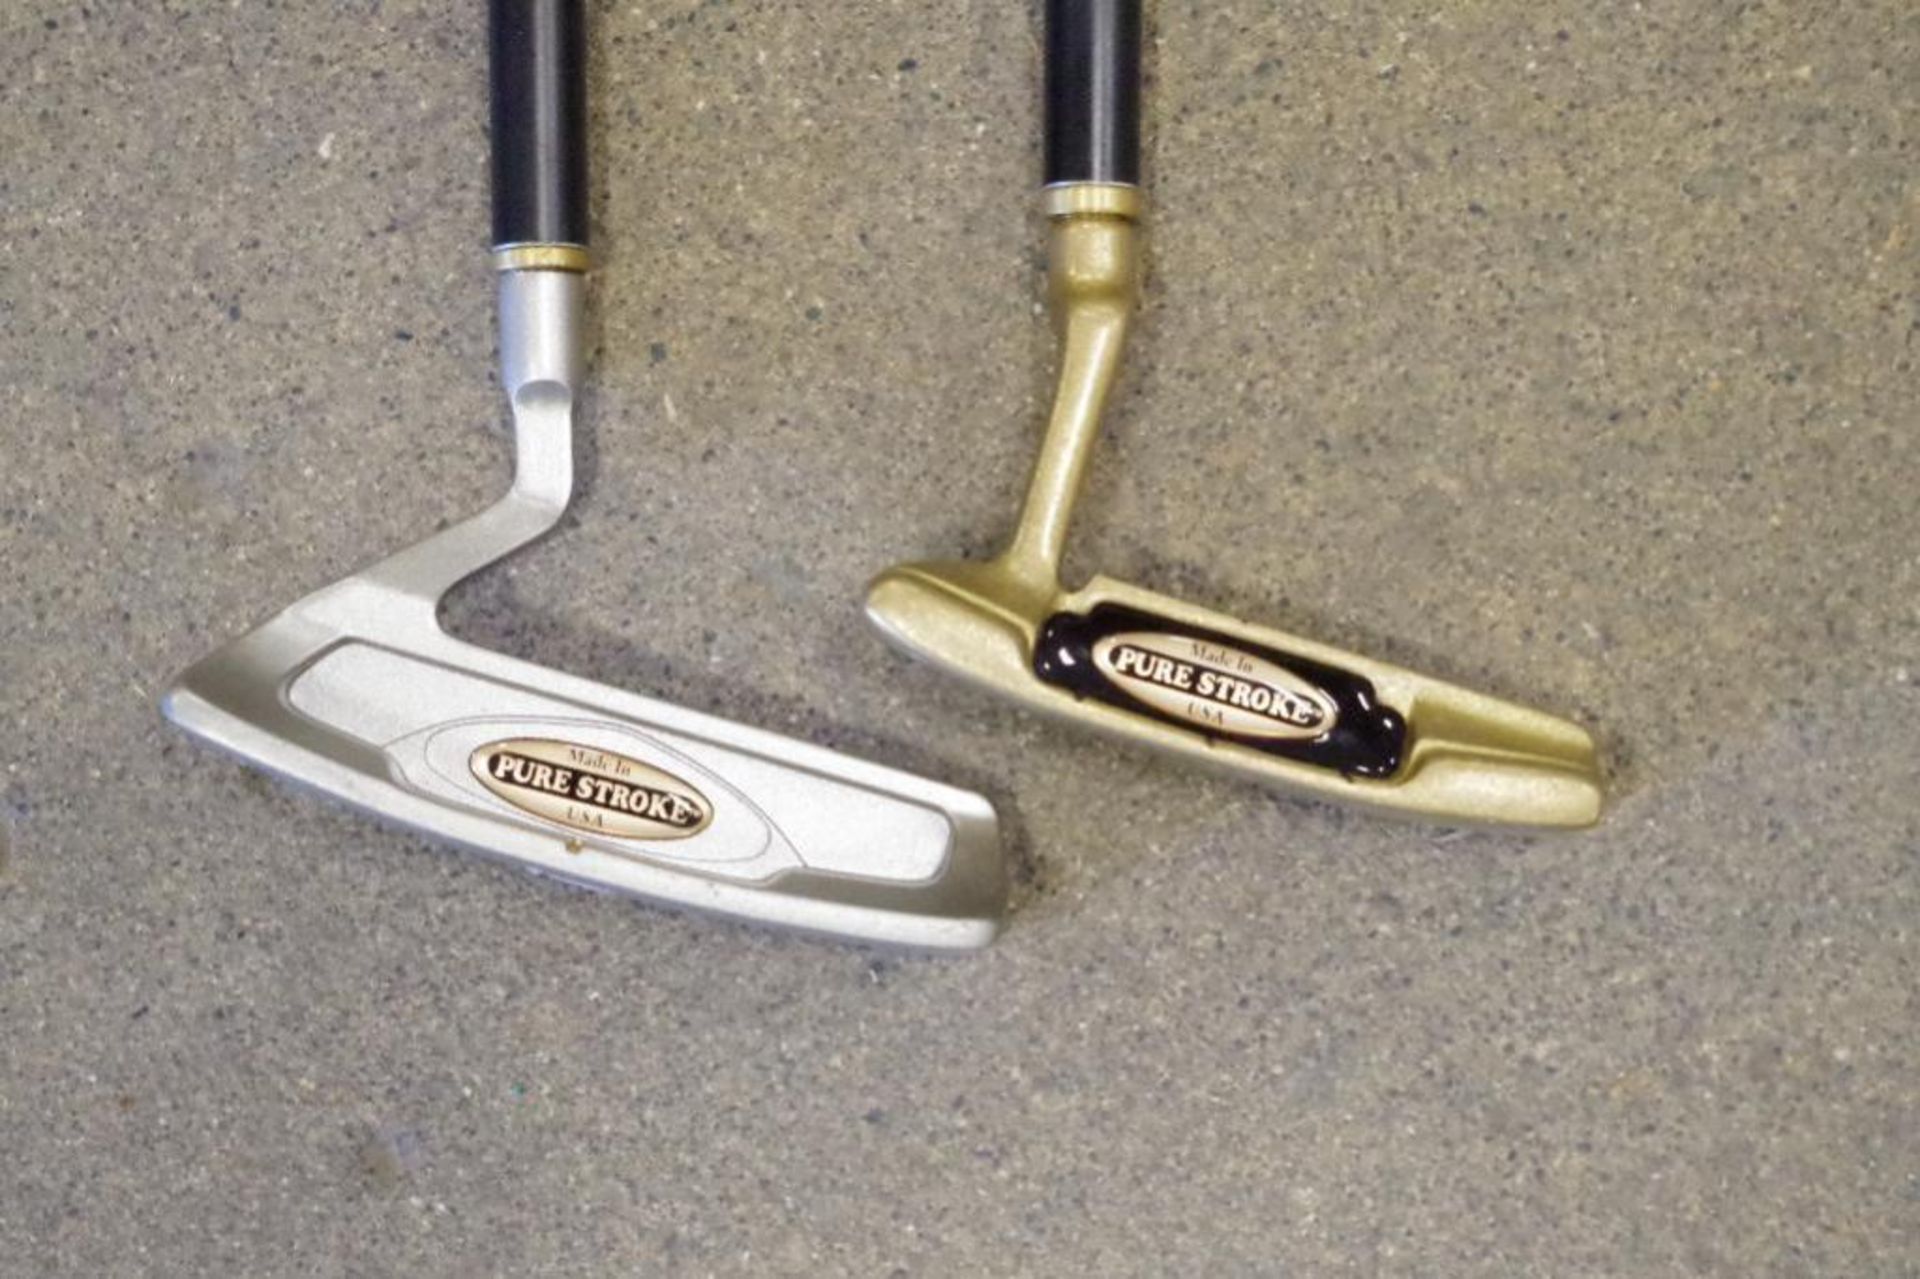 (2) NEW PURE STROKE Putters, 1-Gold, 1-Silver Colored, Made in USA - Image 5 of 5